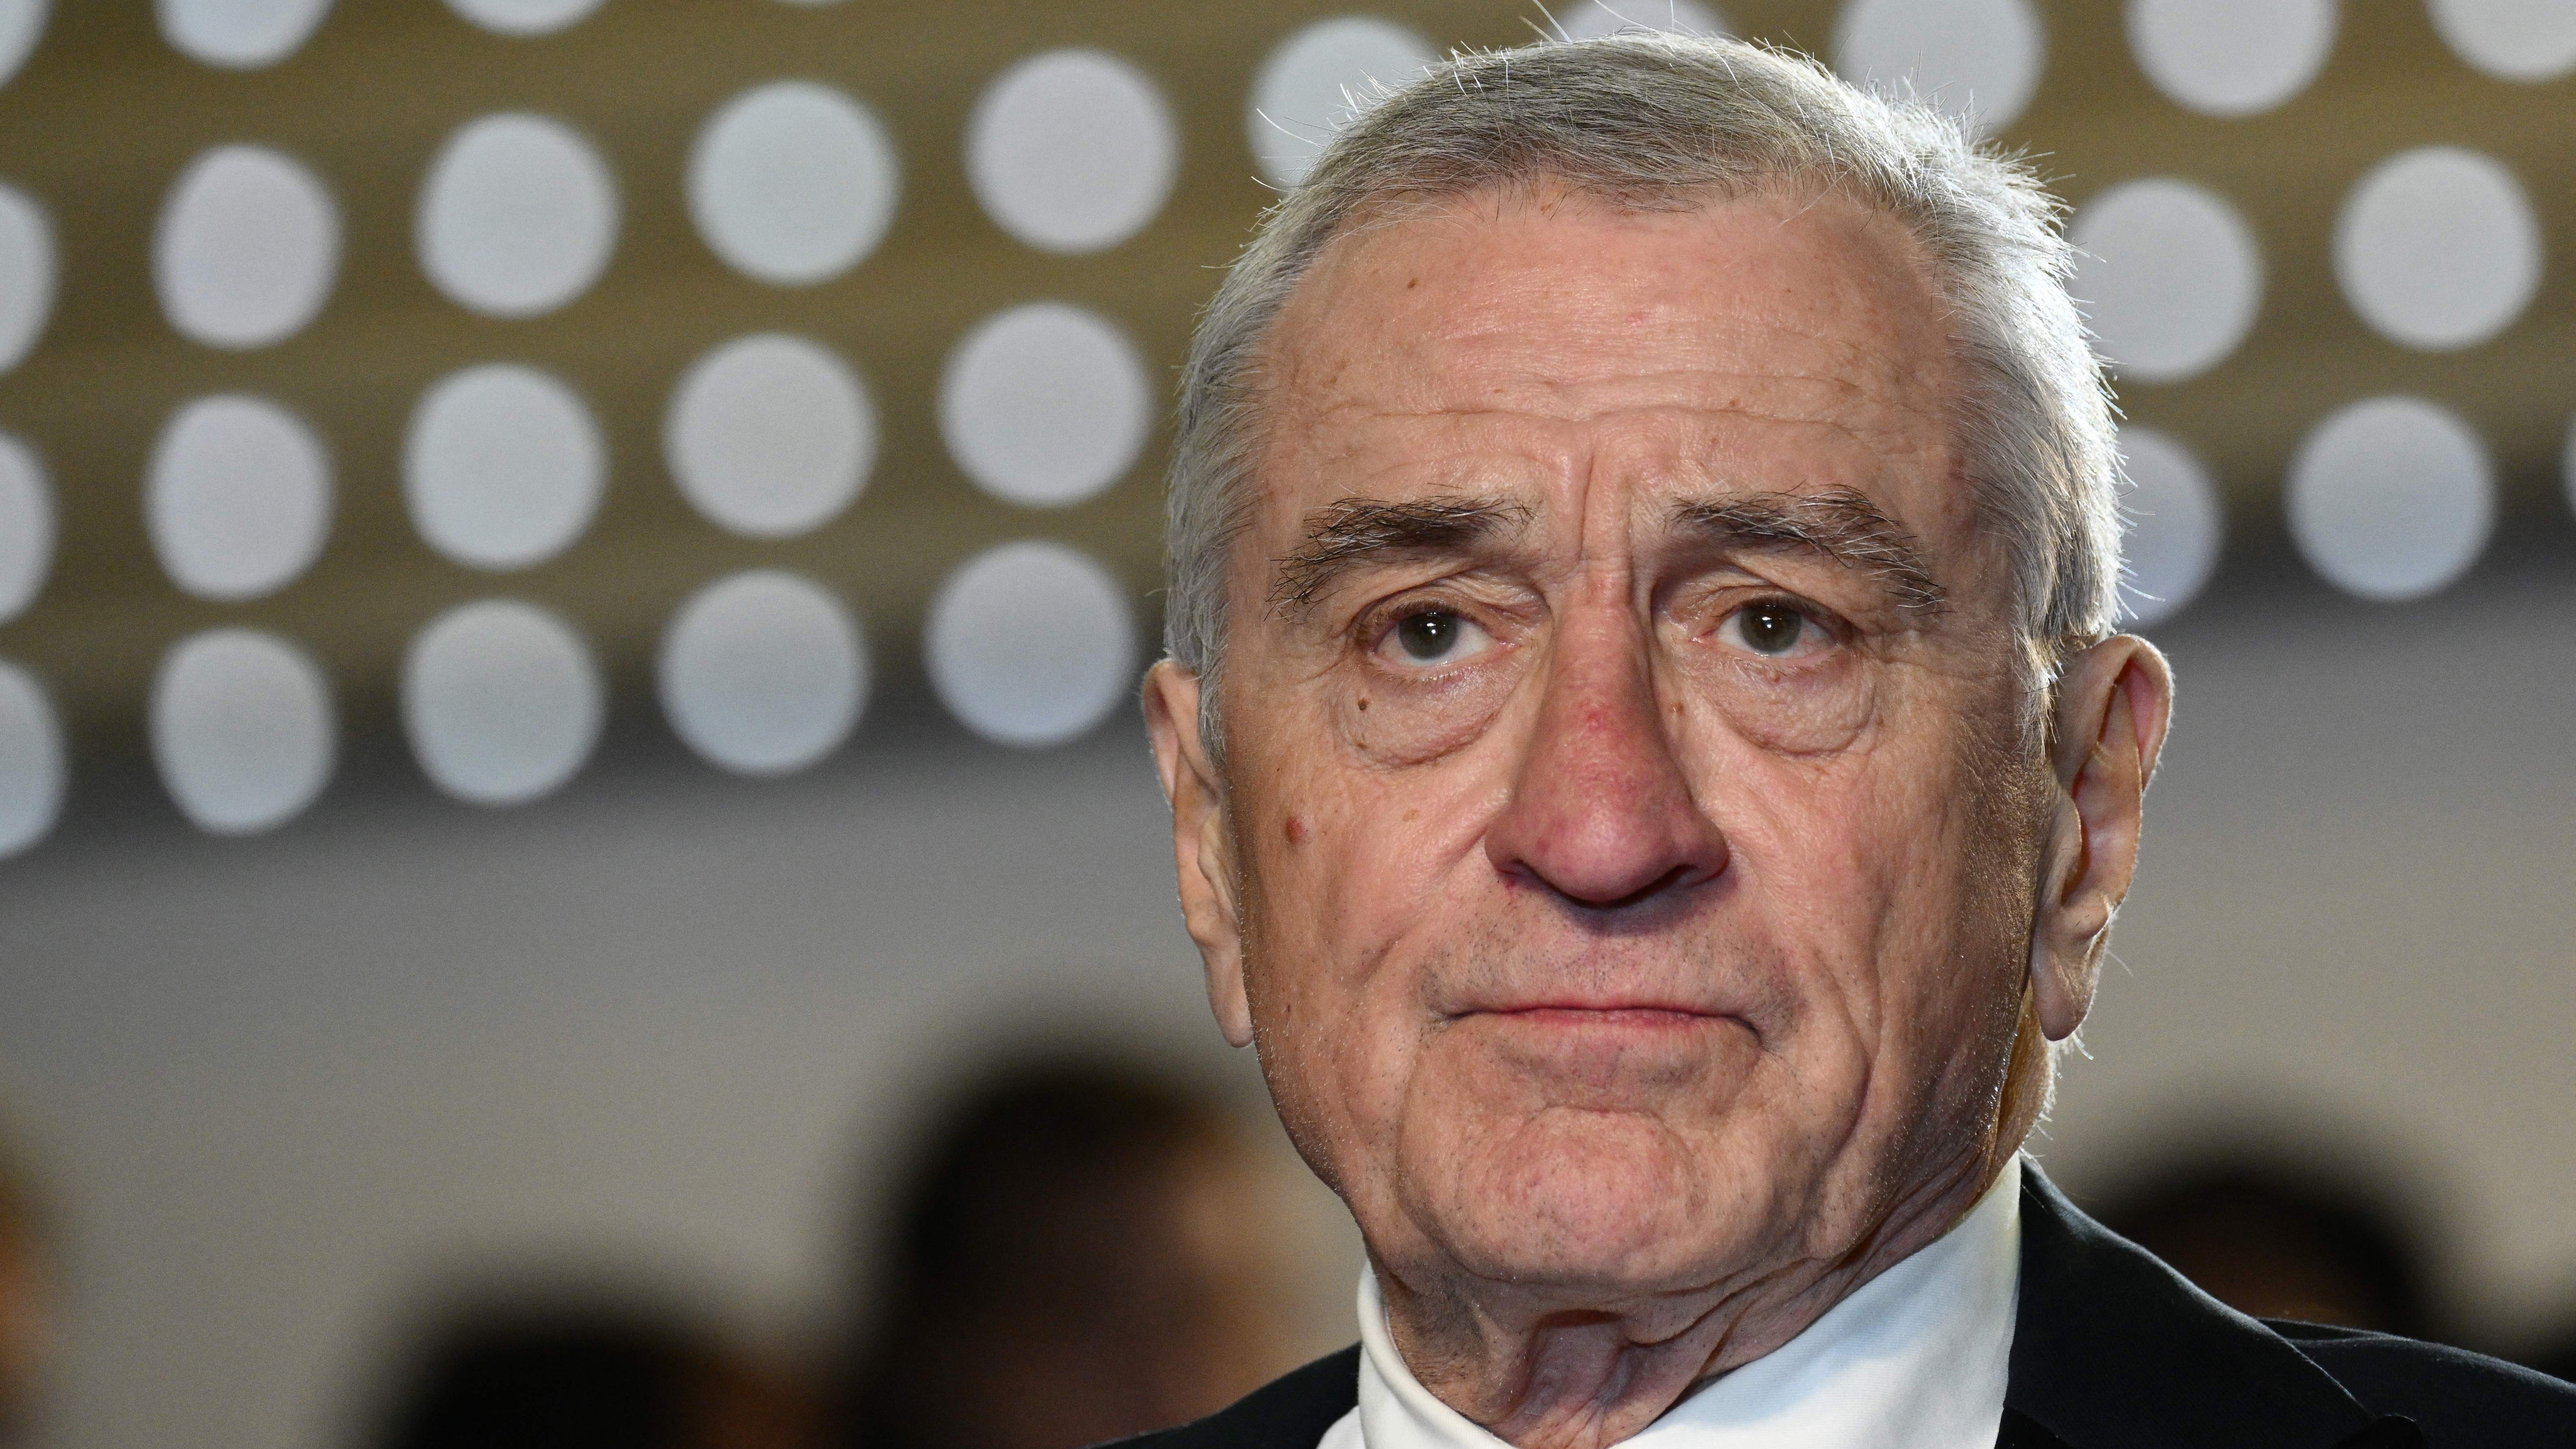 Robert De Niro's daughter claims fentanyl led to death of his 19-year old grandson